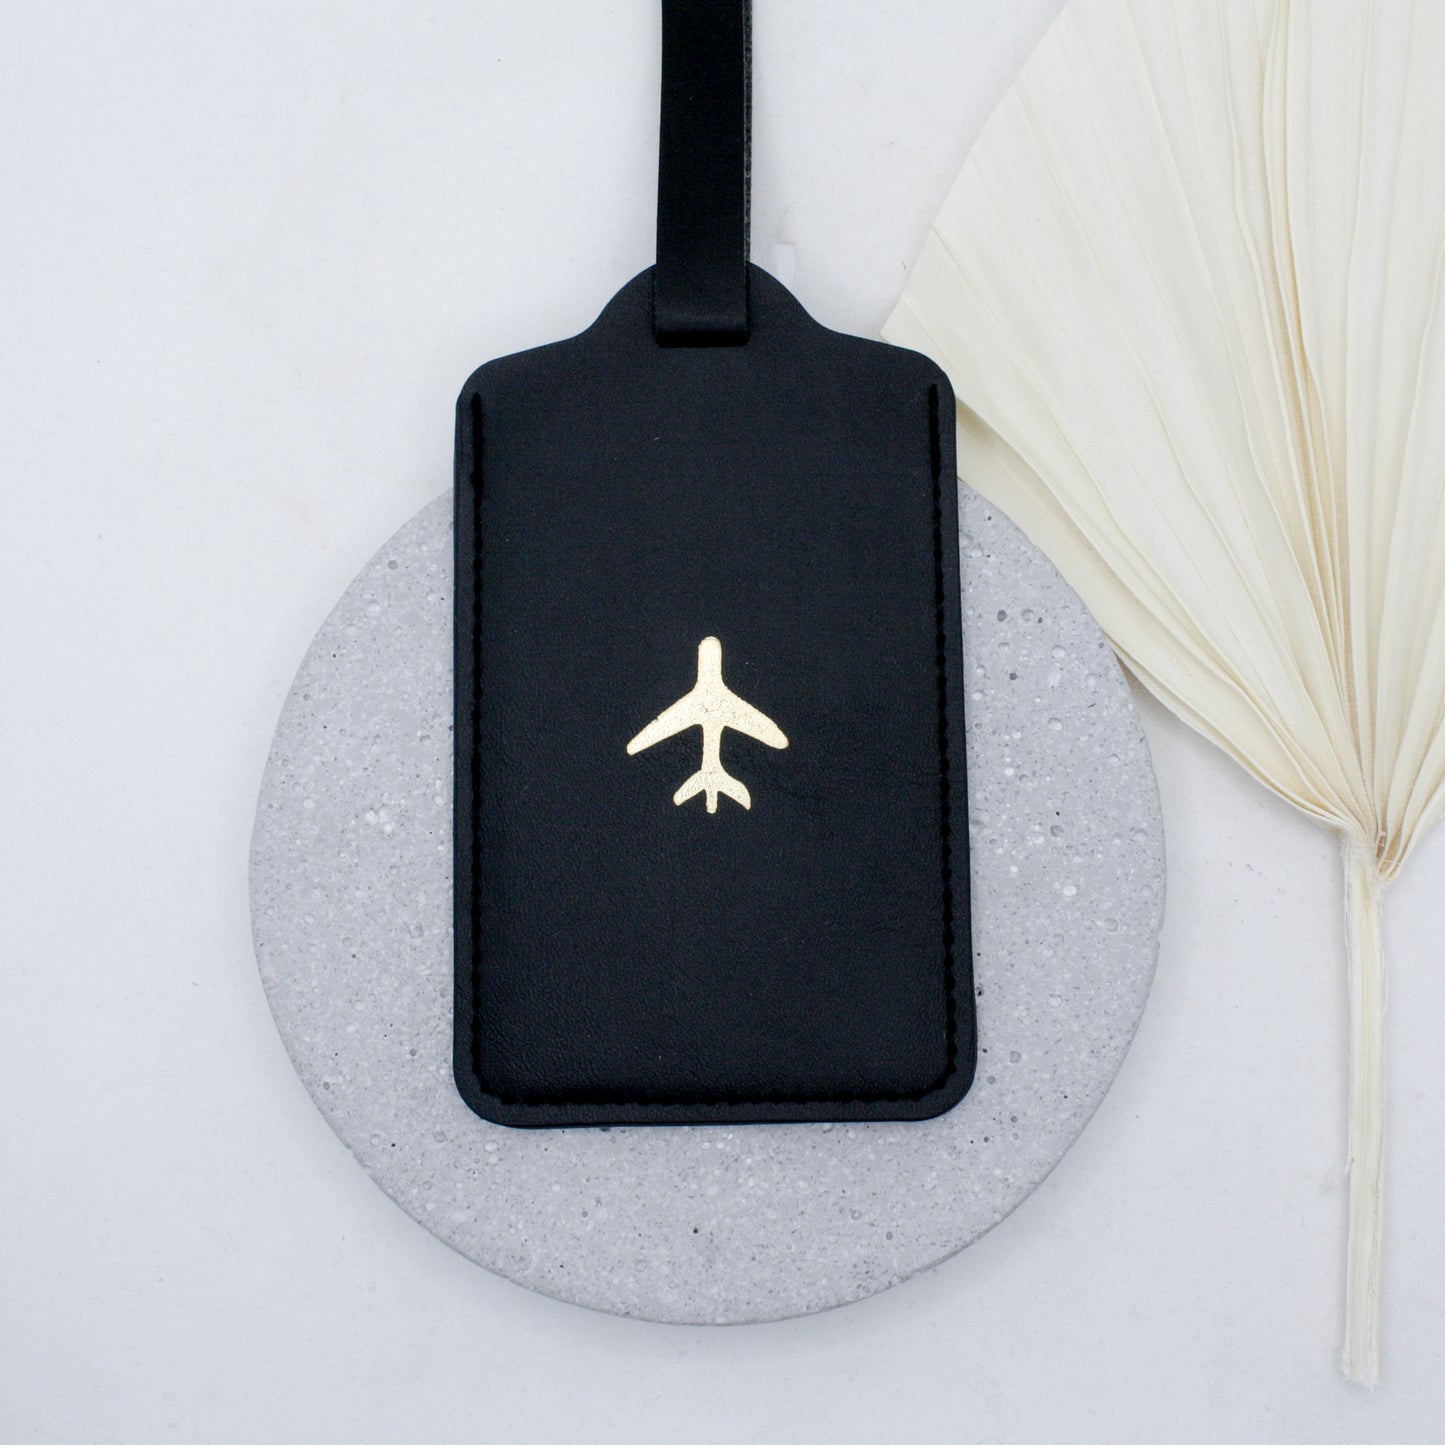 Travel Often Luggage Tags